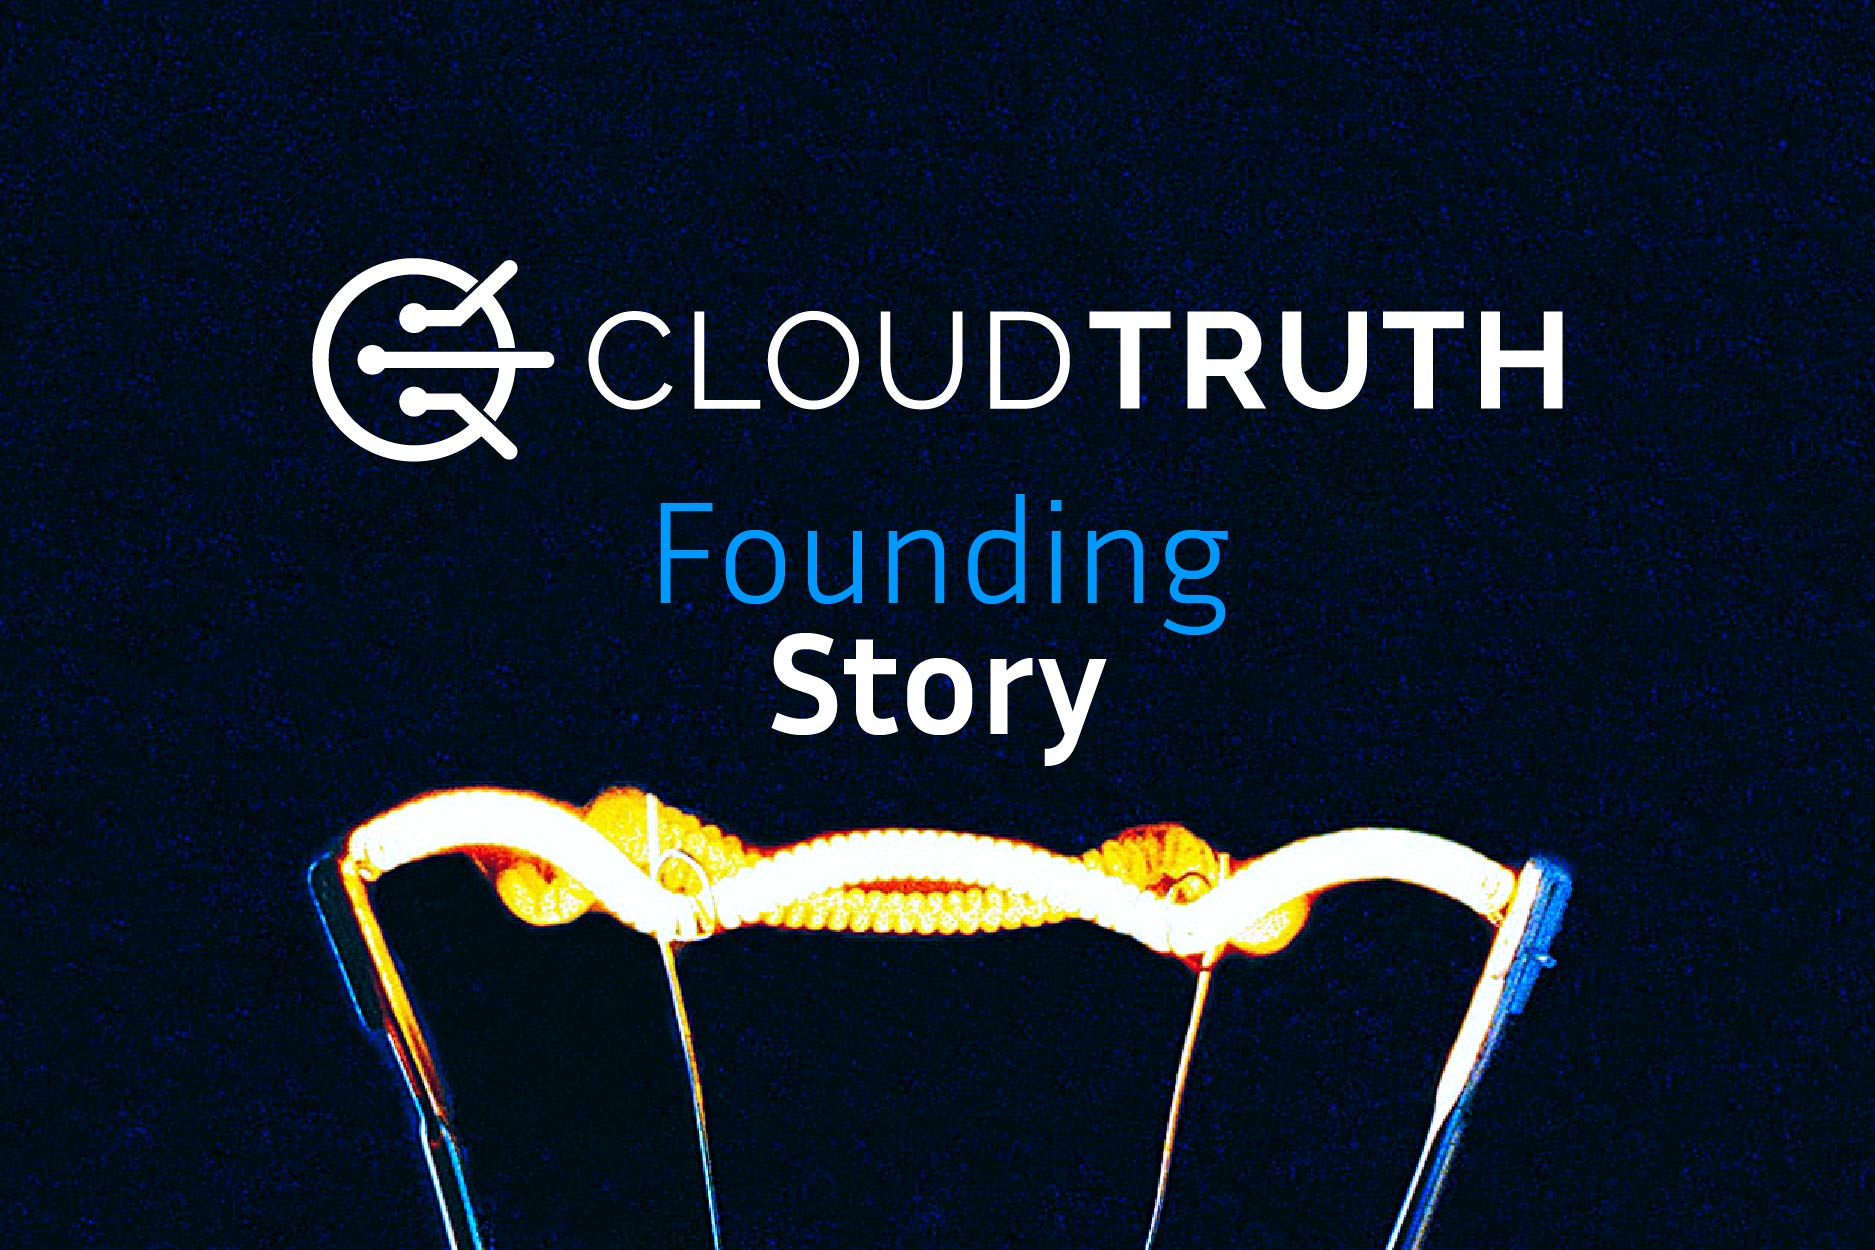 CloudTruth Founding Story: Find the Problem, Find the Solution